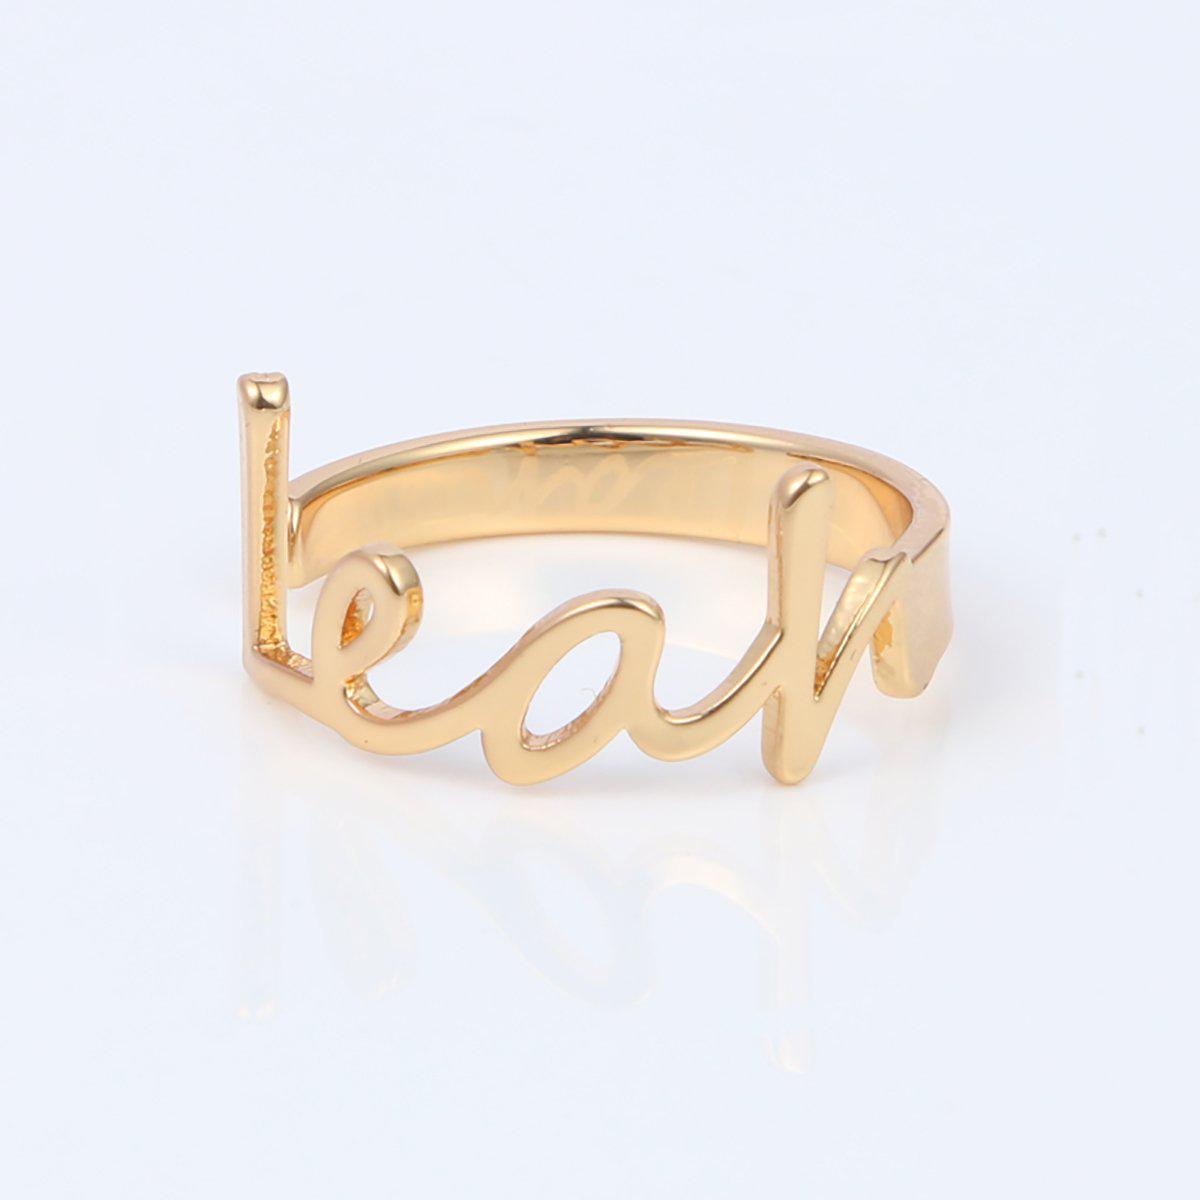 Personalize Your Name Bold Ring - Blinglane